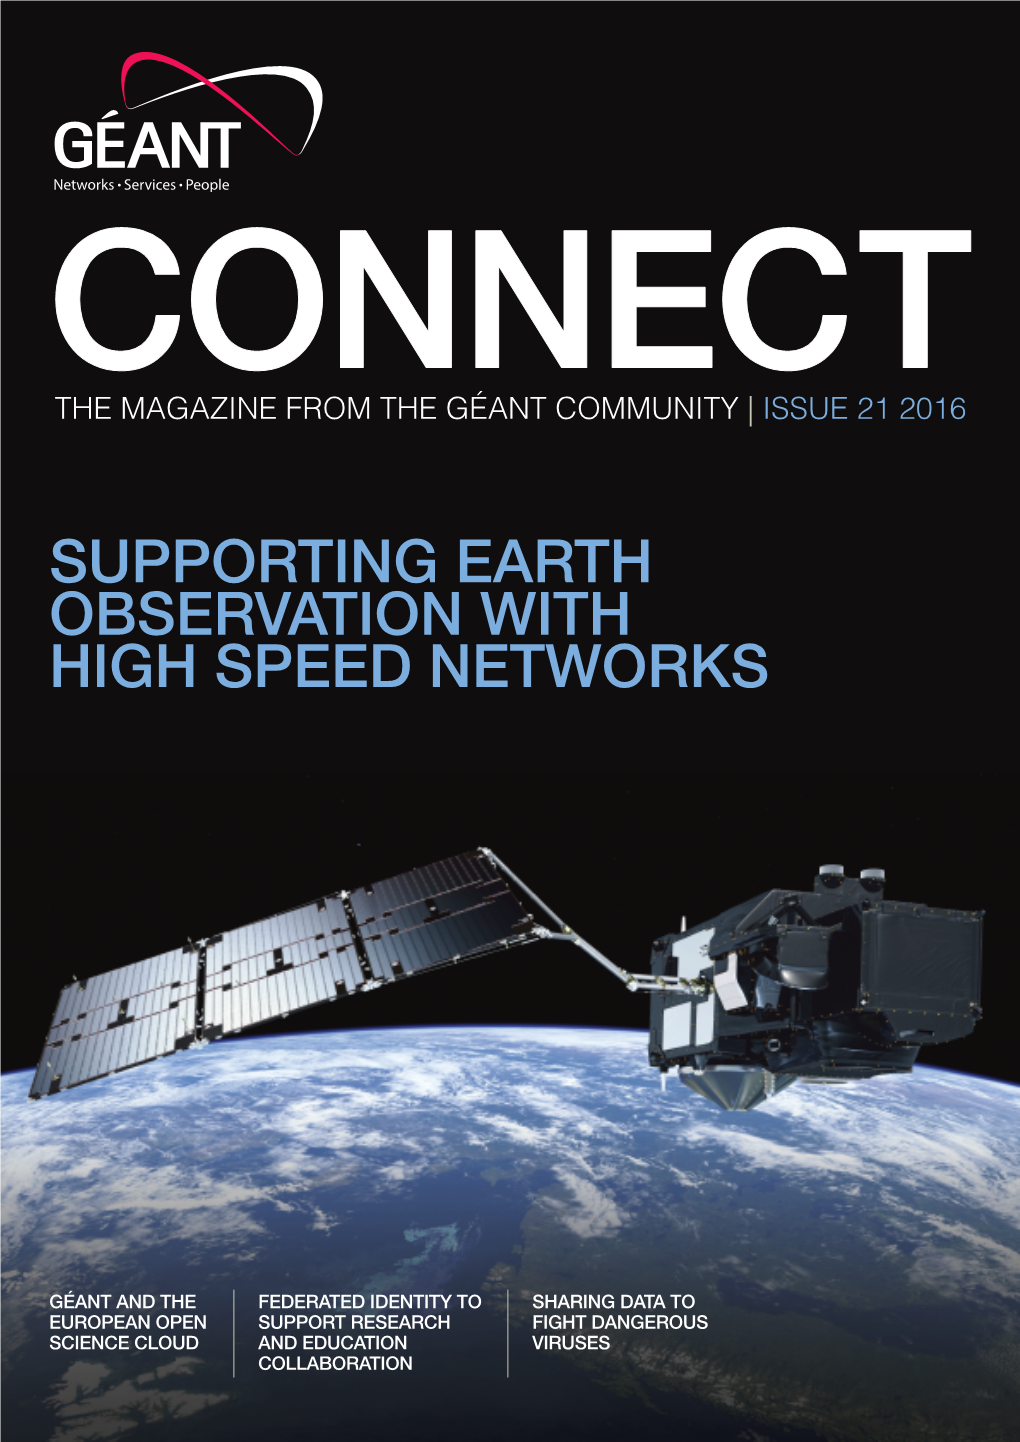 Supporting Earth Observation with High Speed Networks